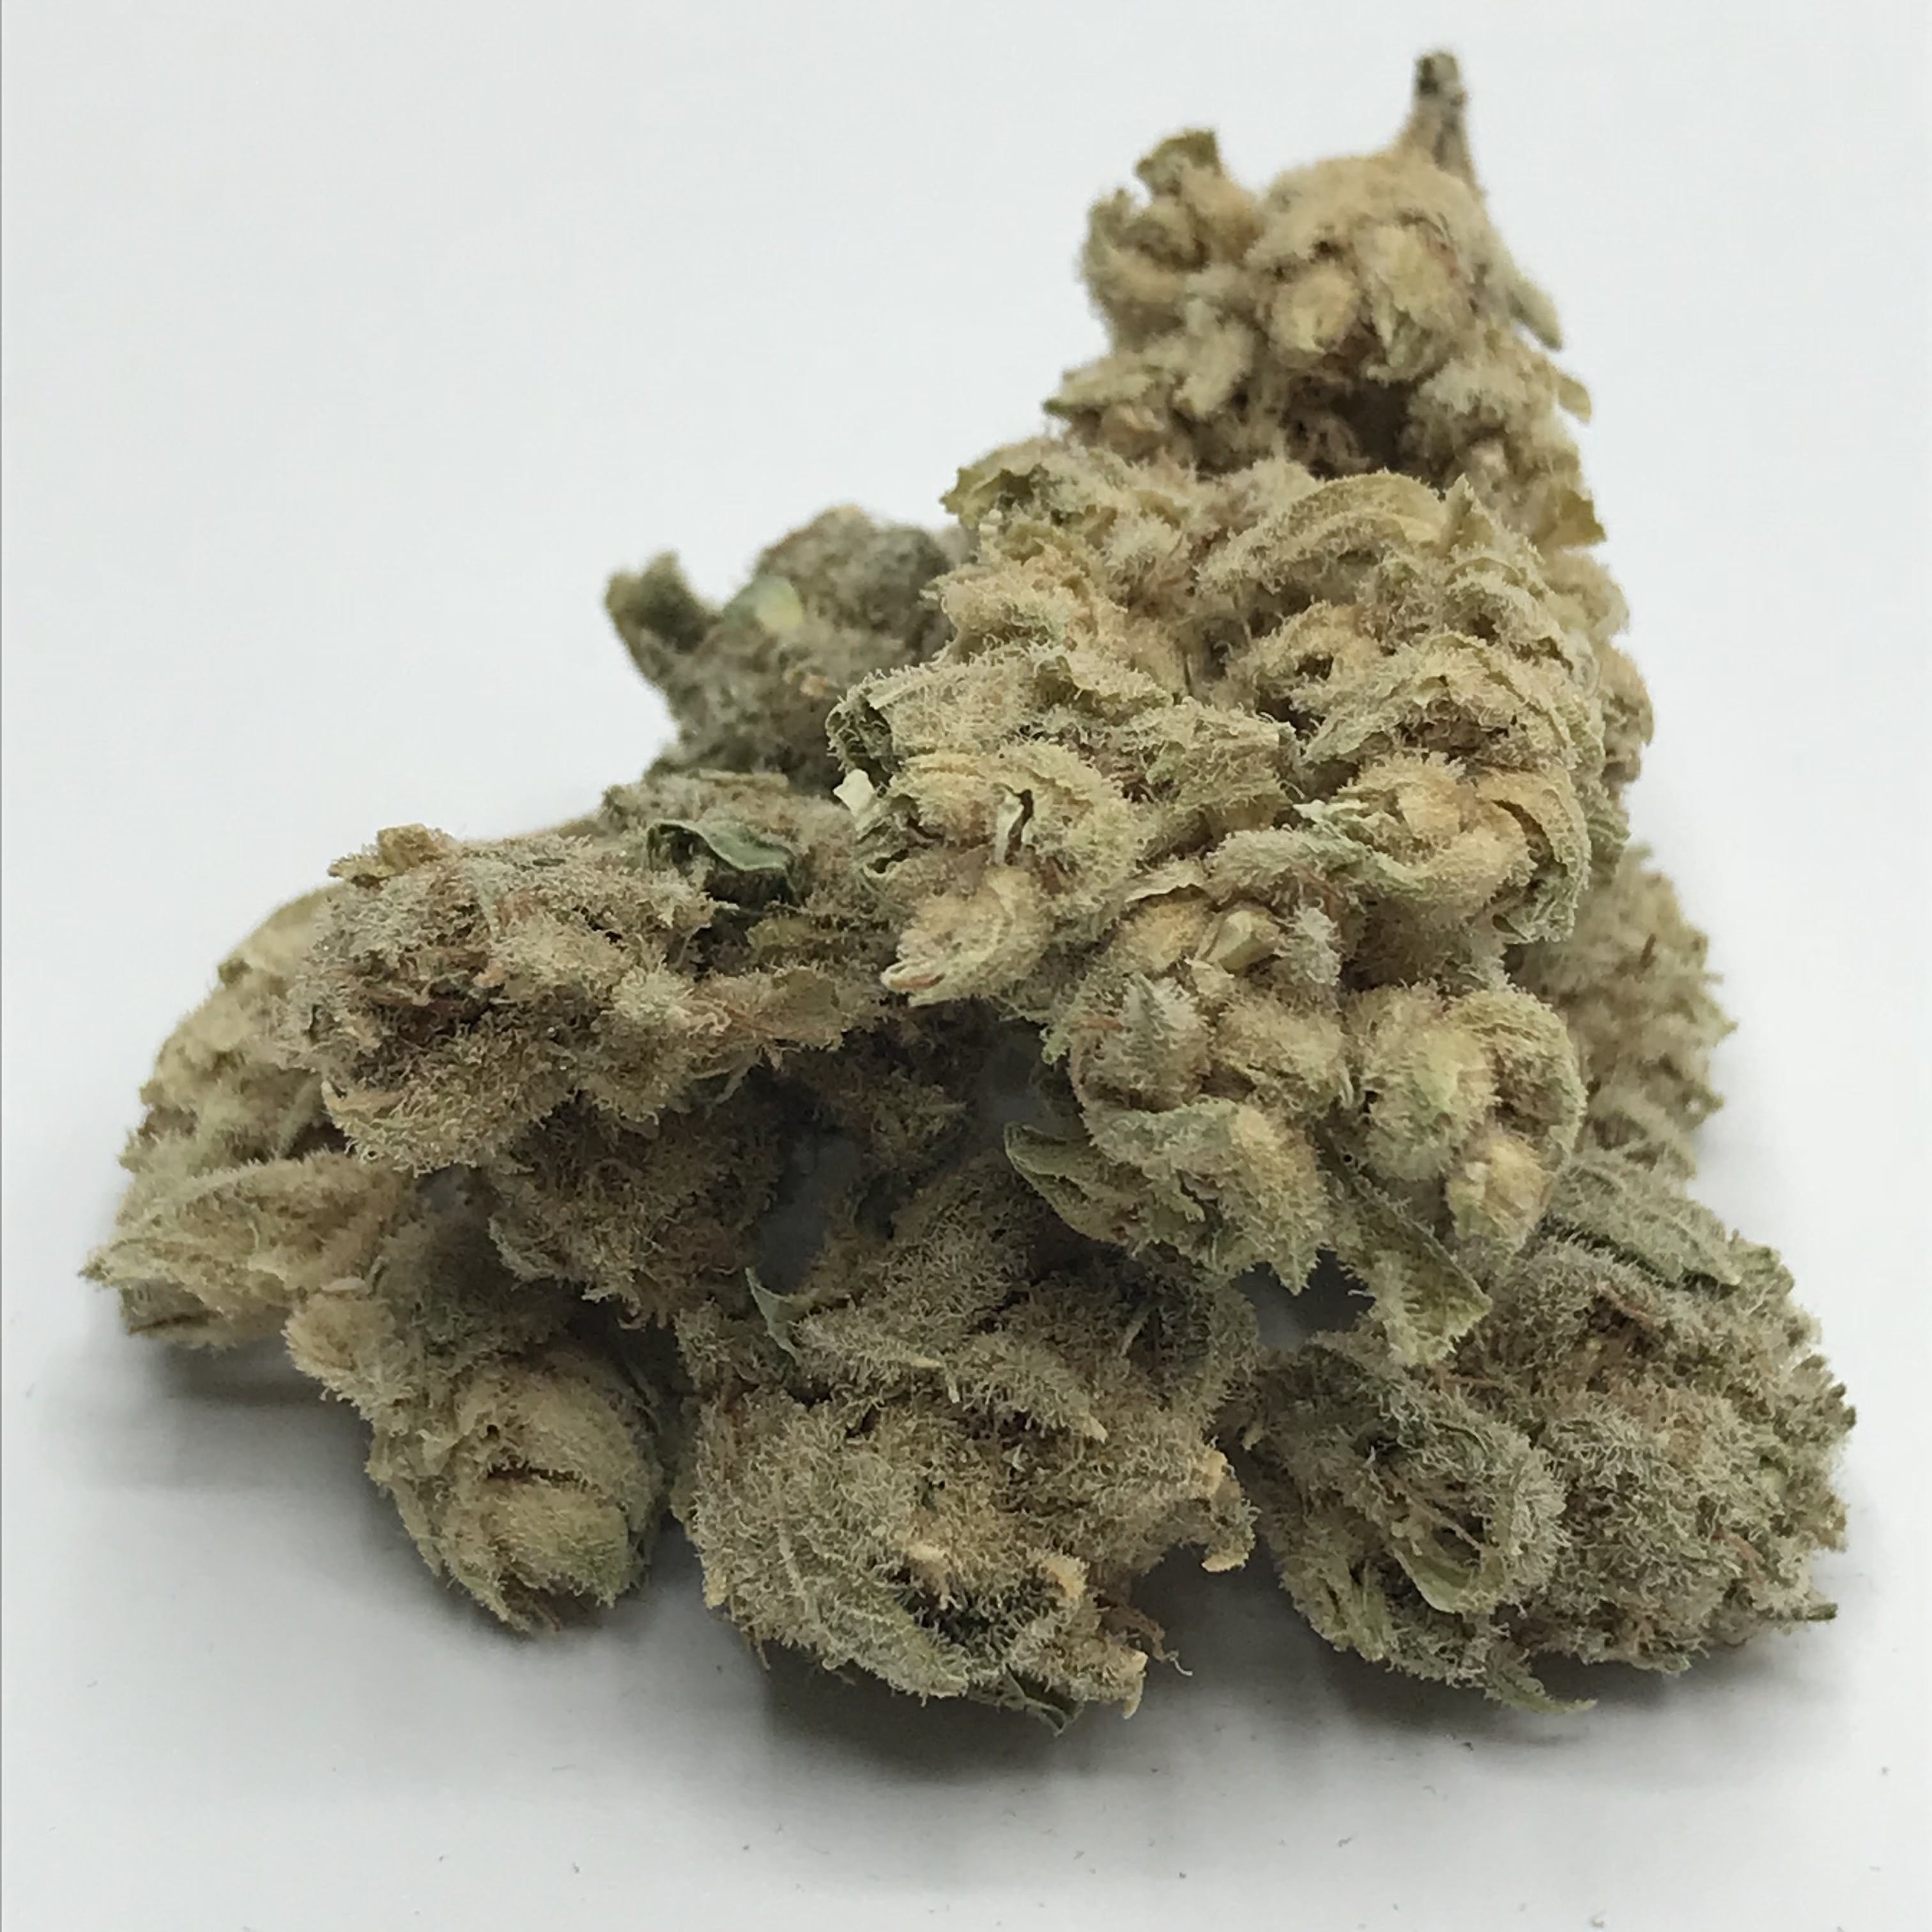 marijuana-dispensaries-202-coursevall-drive-suite-108-centreville-strawberry-banana-harvest-of-maryland